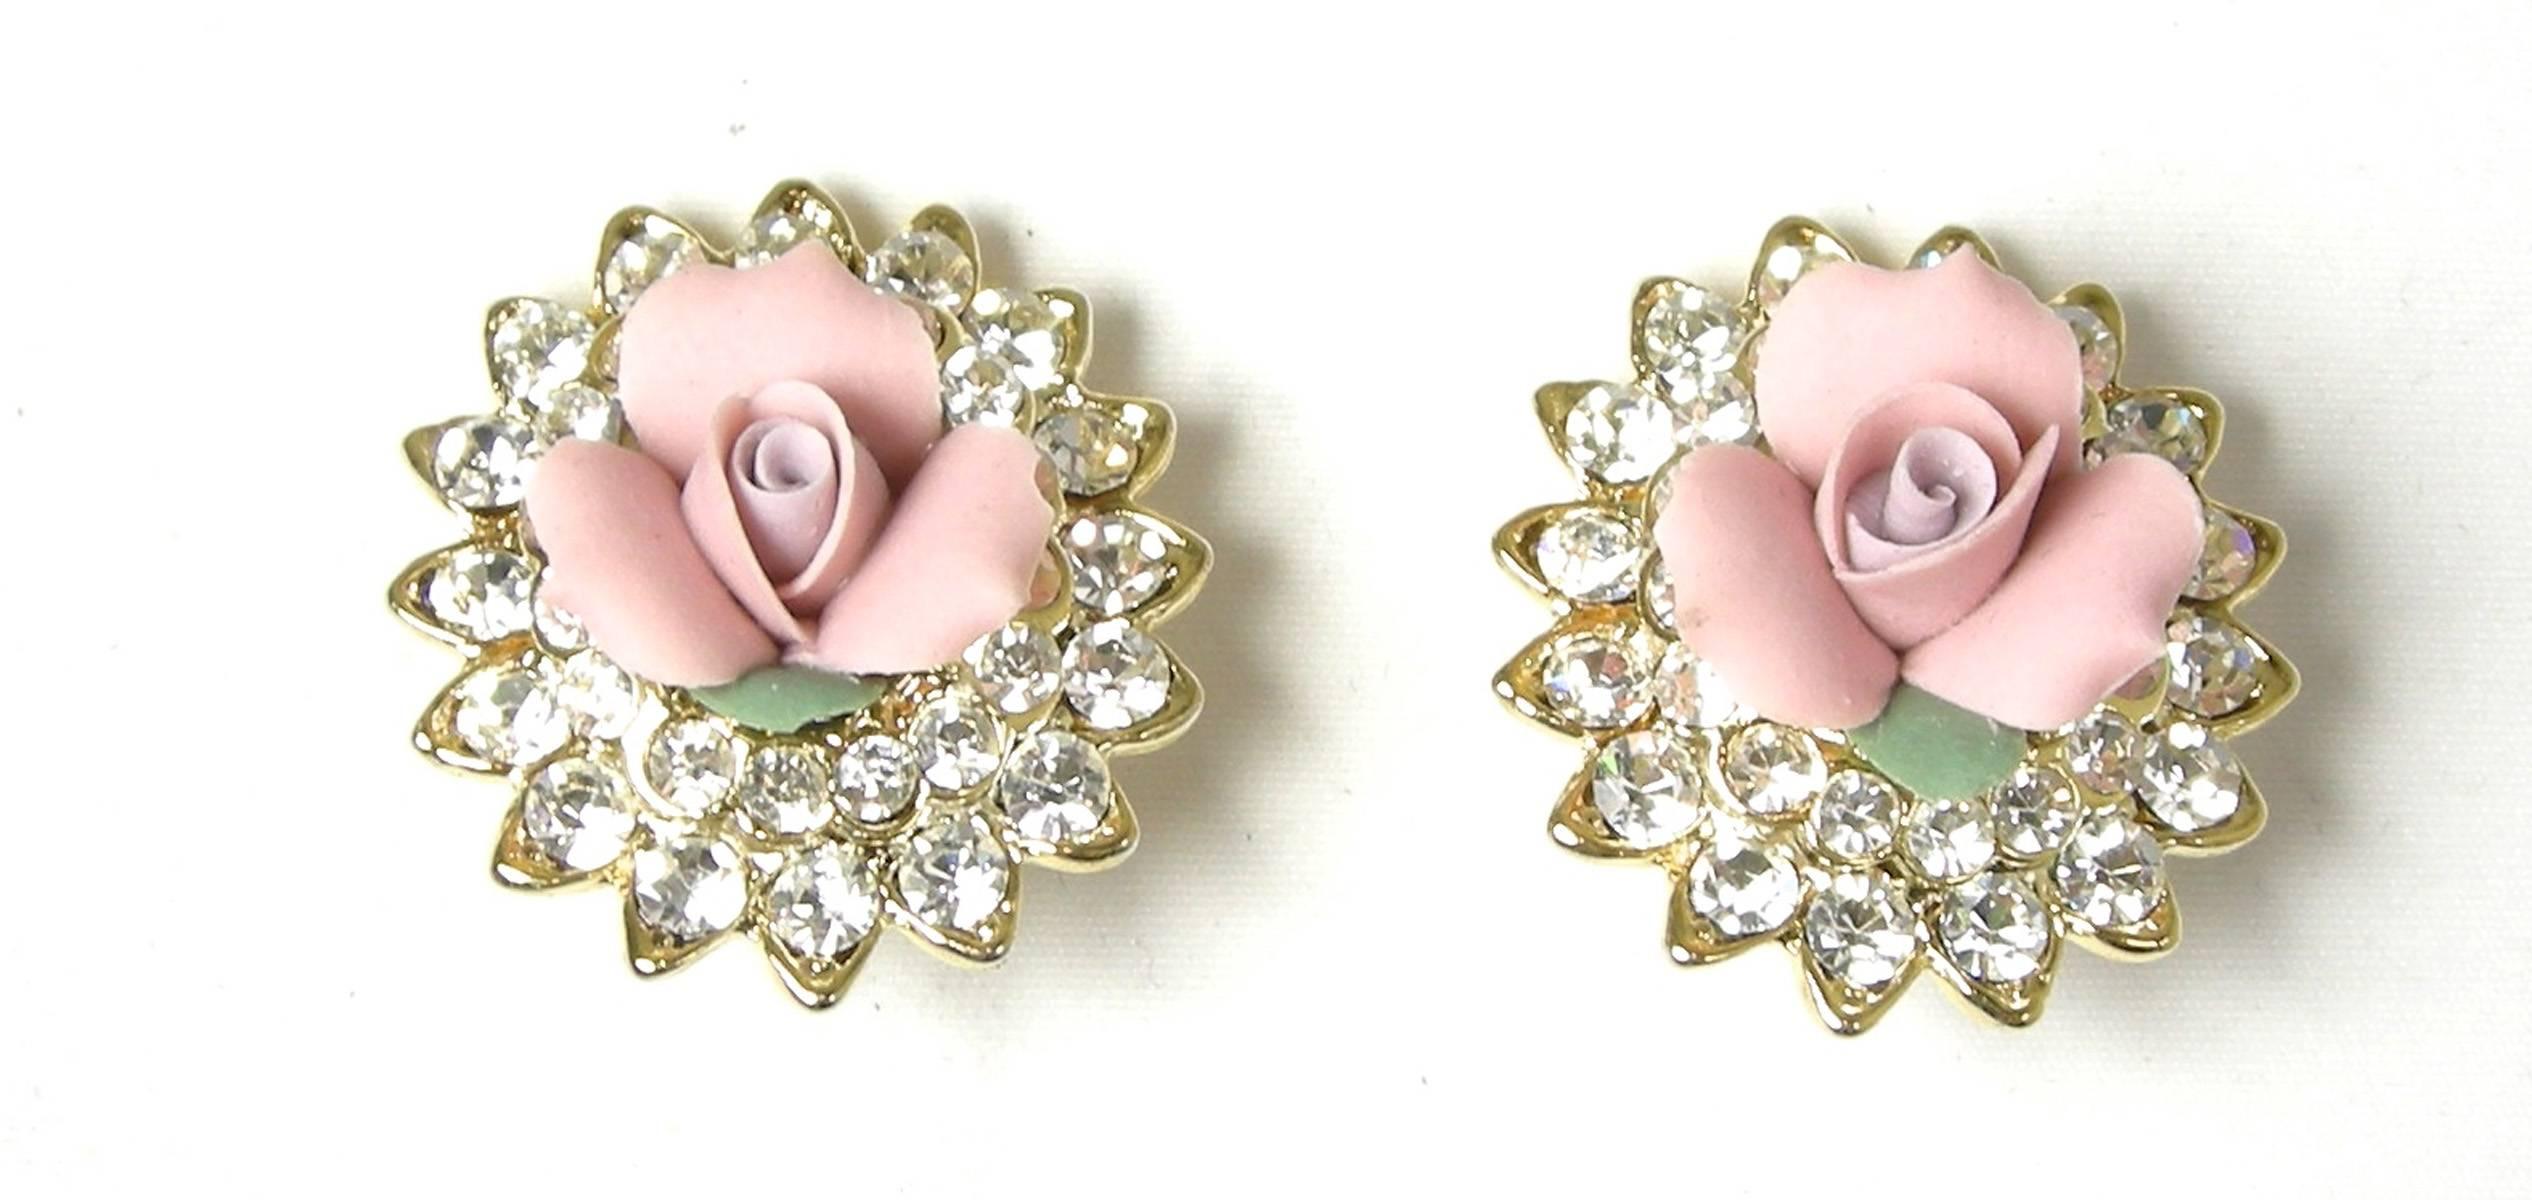 These signed Kenneth Jay Lane earrings have beautiful vibrant crystals and are made with pink carved resin flower centers. These clip-back earrings are set in a gold-tone setting and measure 1” x 1”. They are signed “Kenneth Lane” and are in